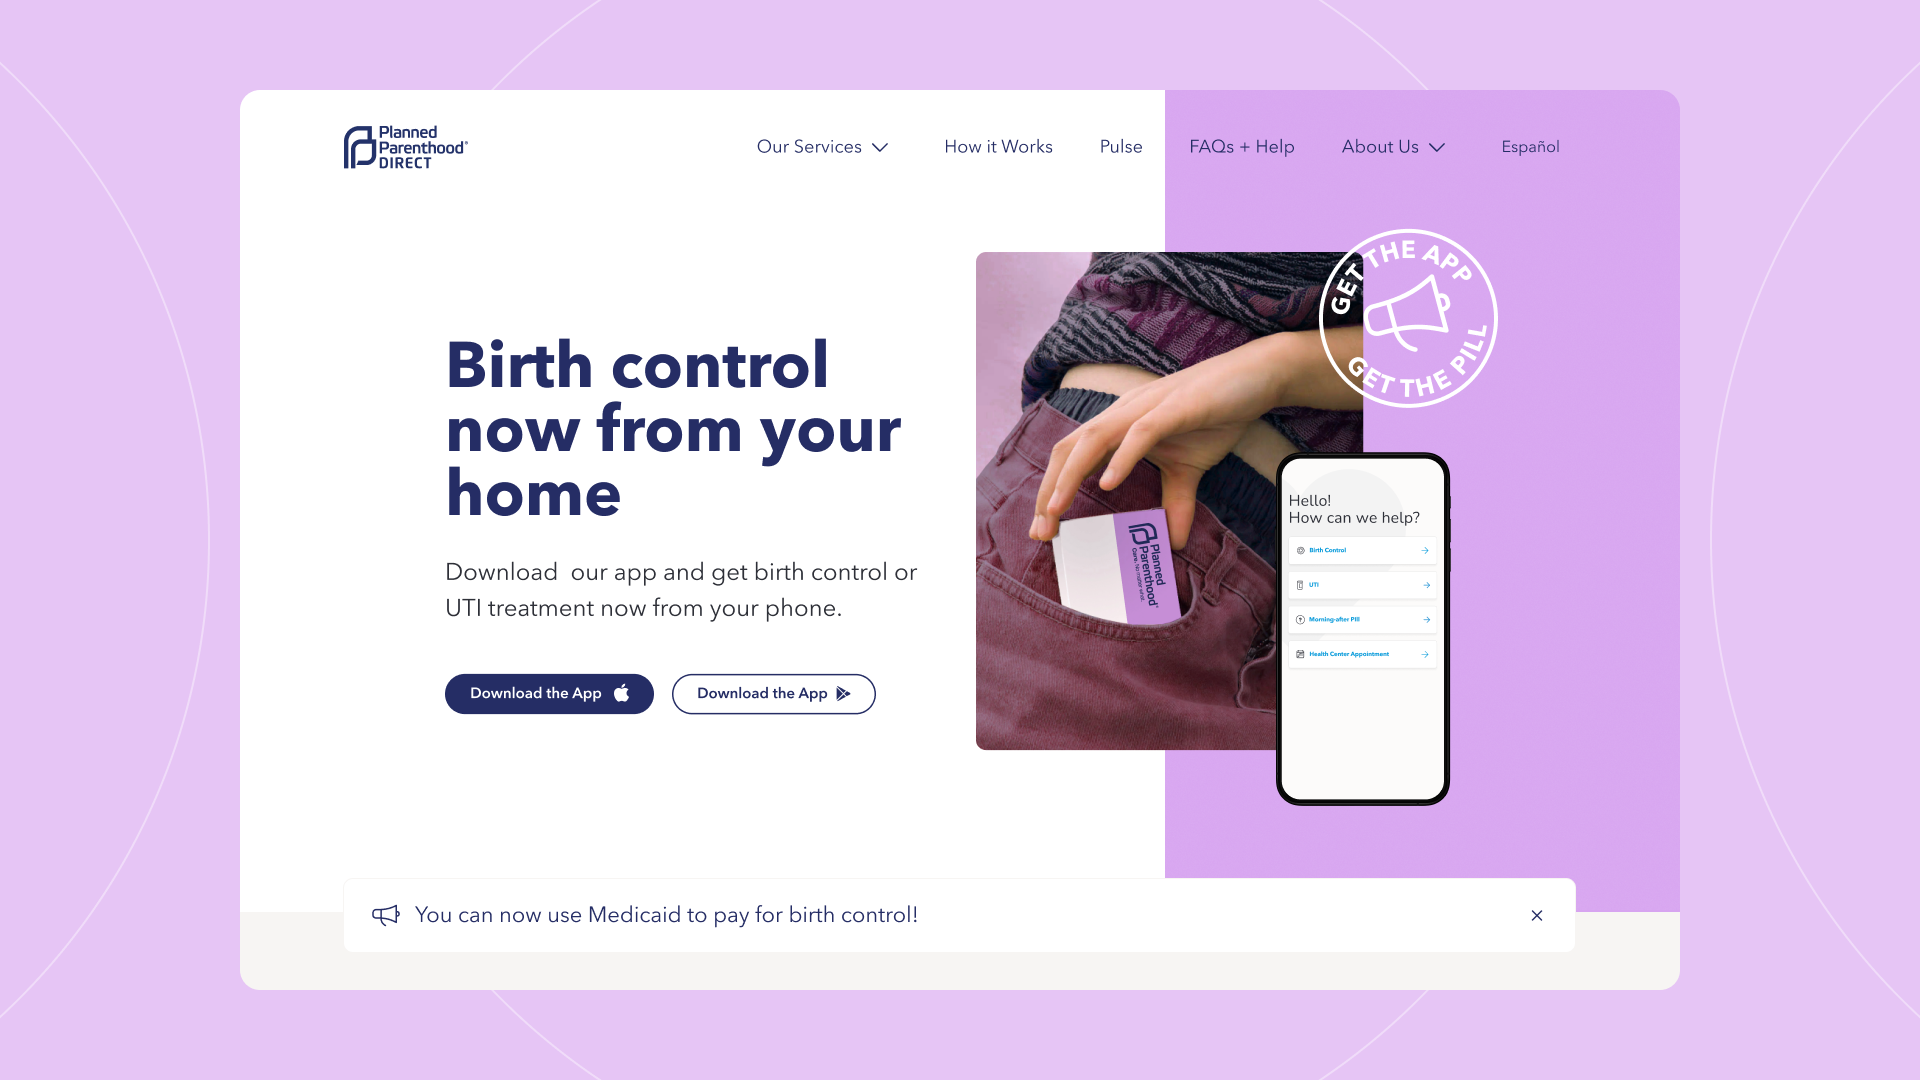 Landing page titled "Birth control now from your home"